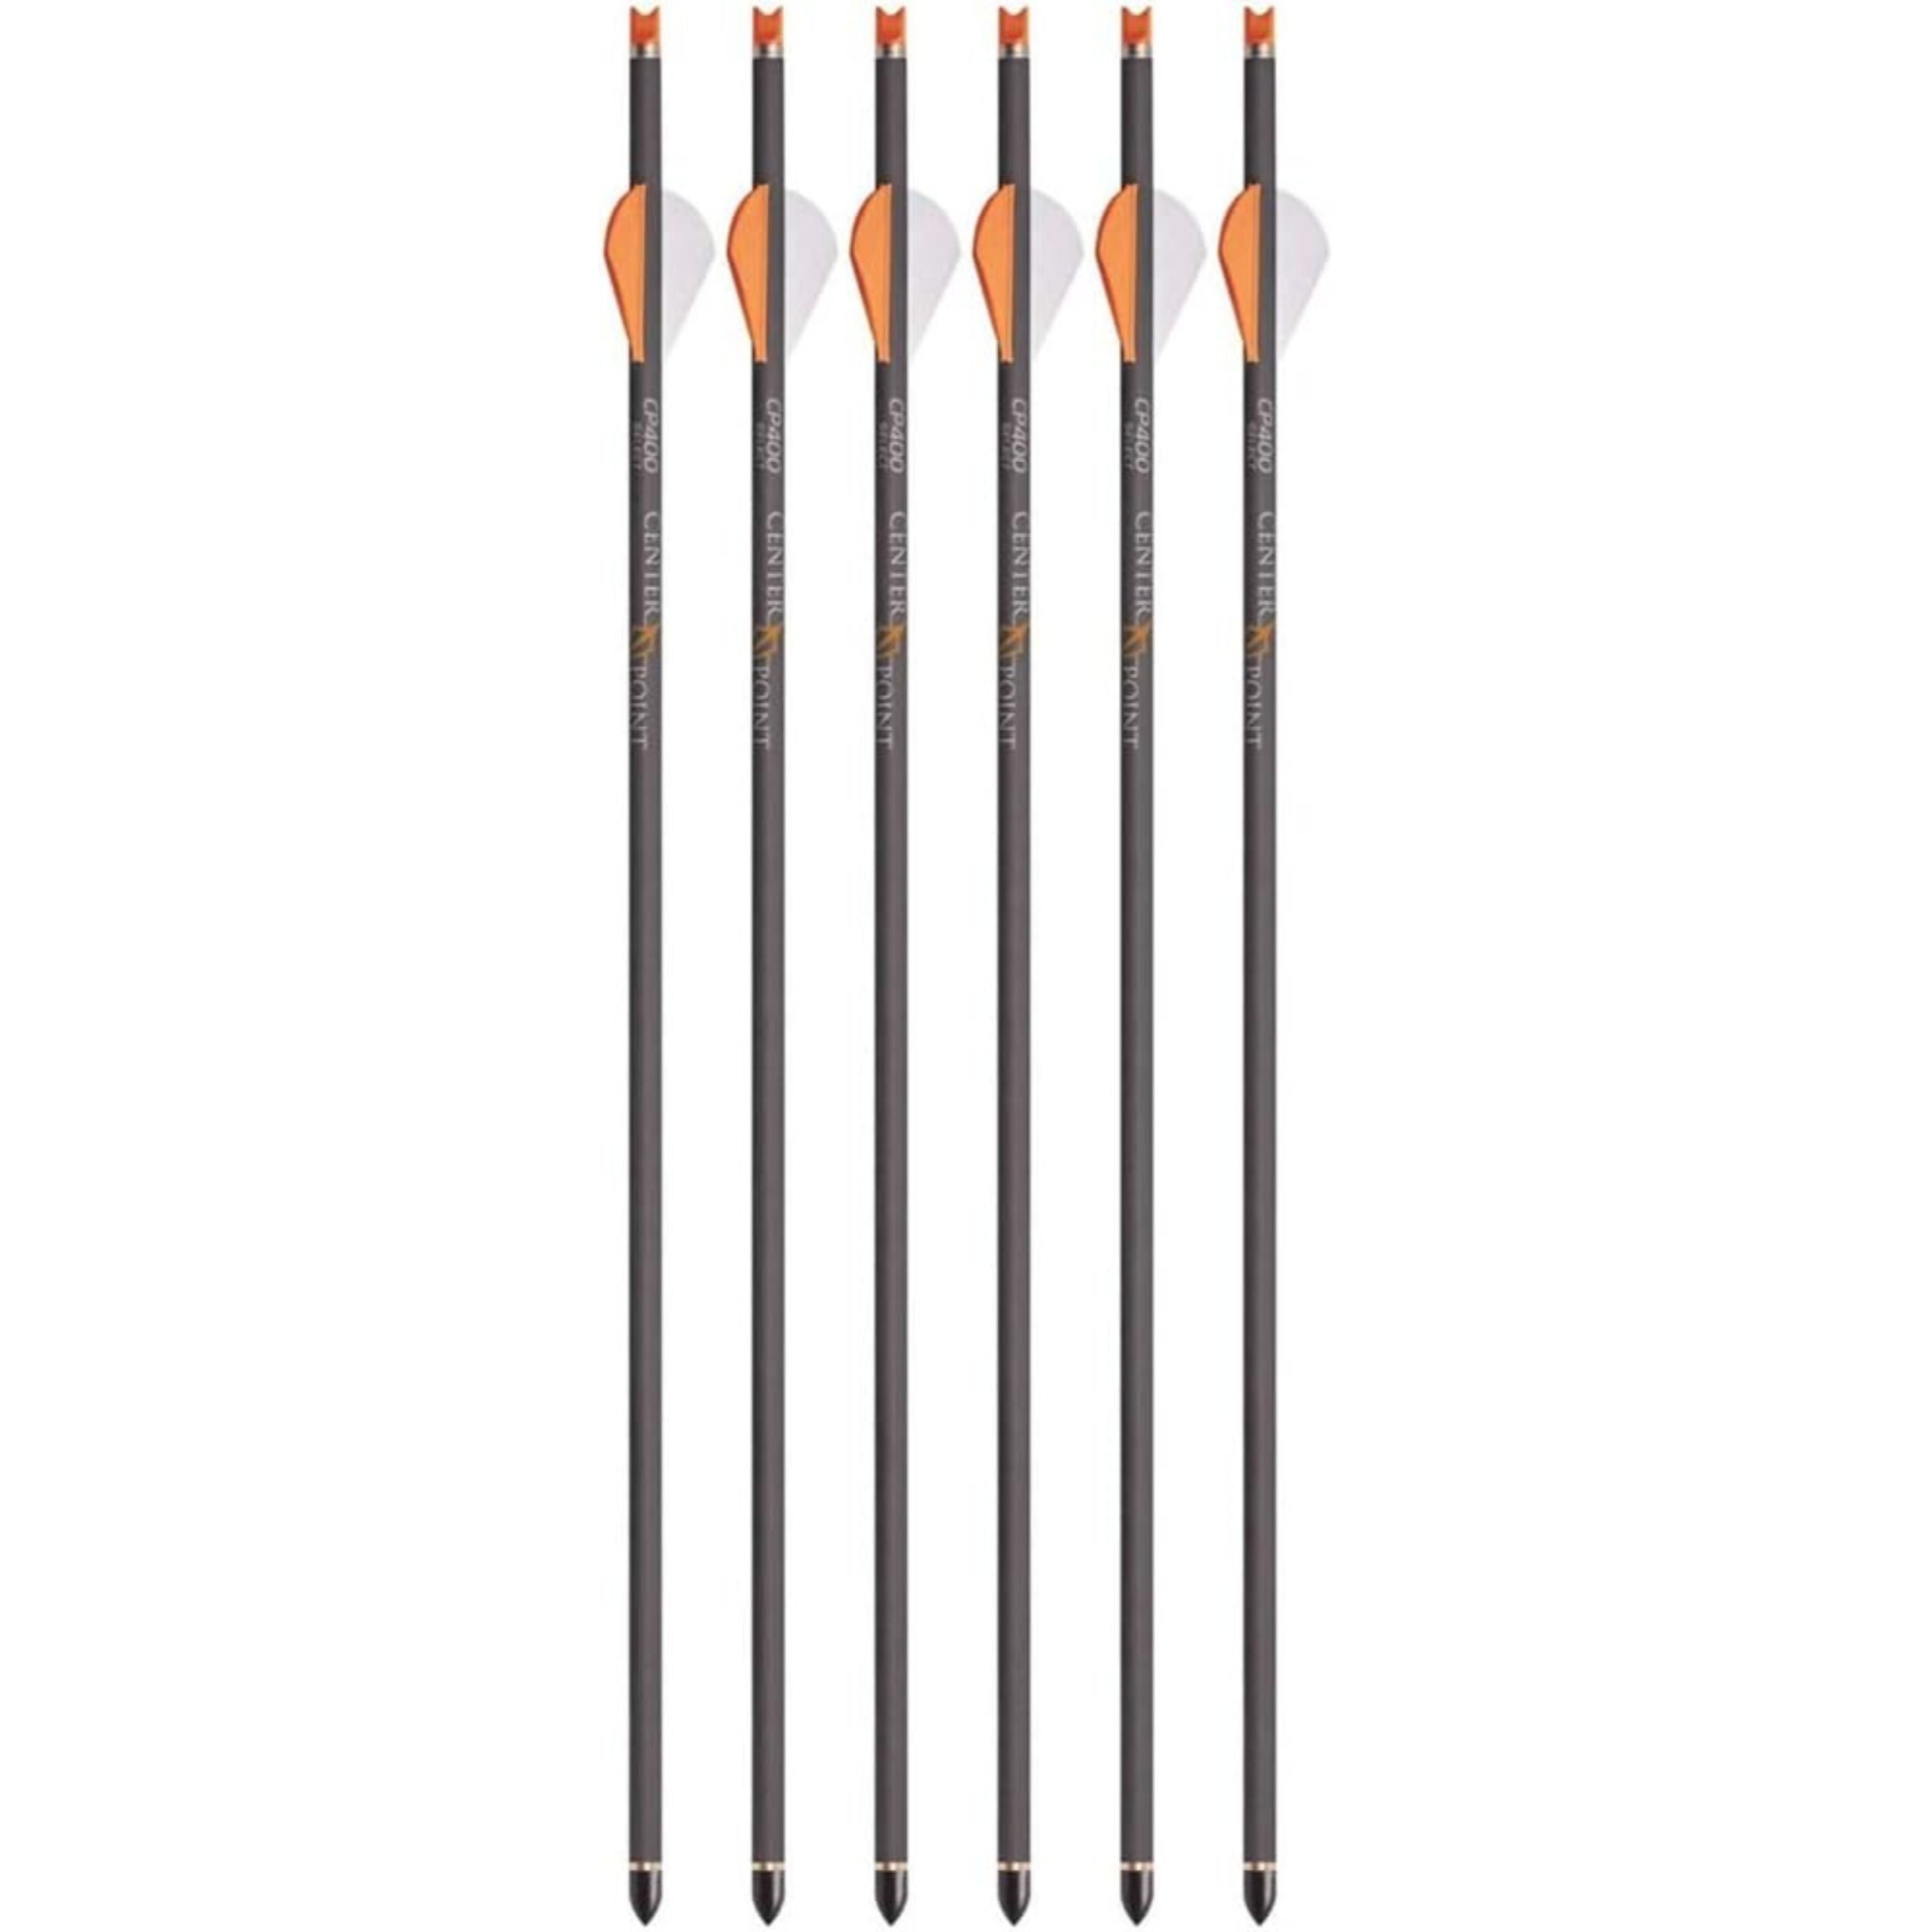 "CP400" arrows pack